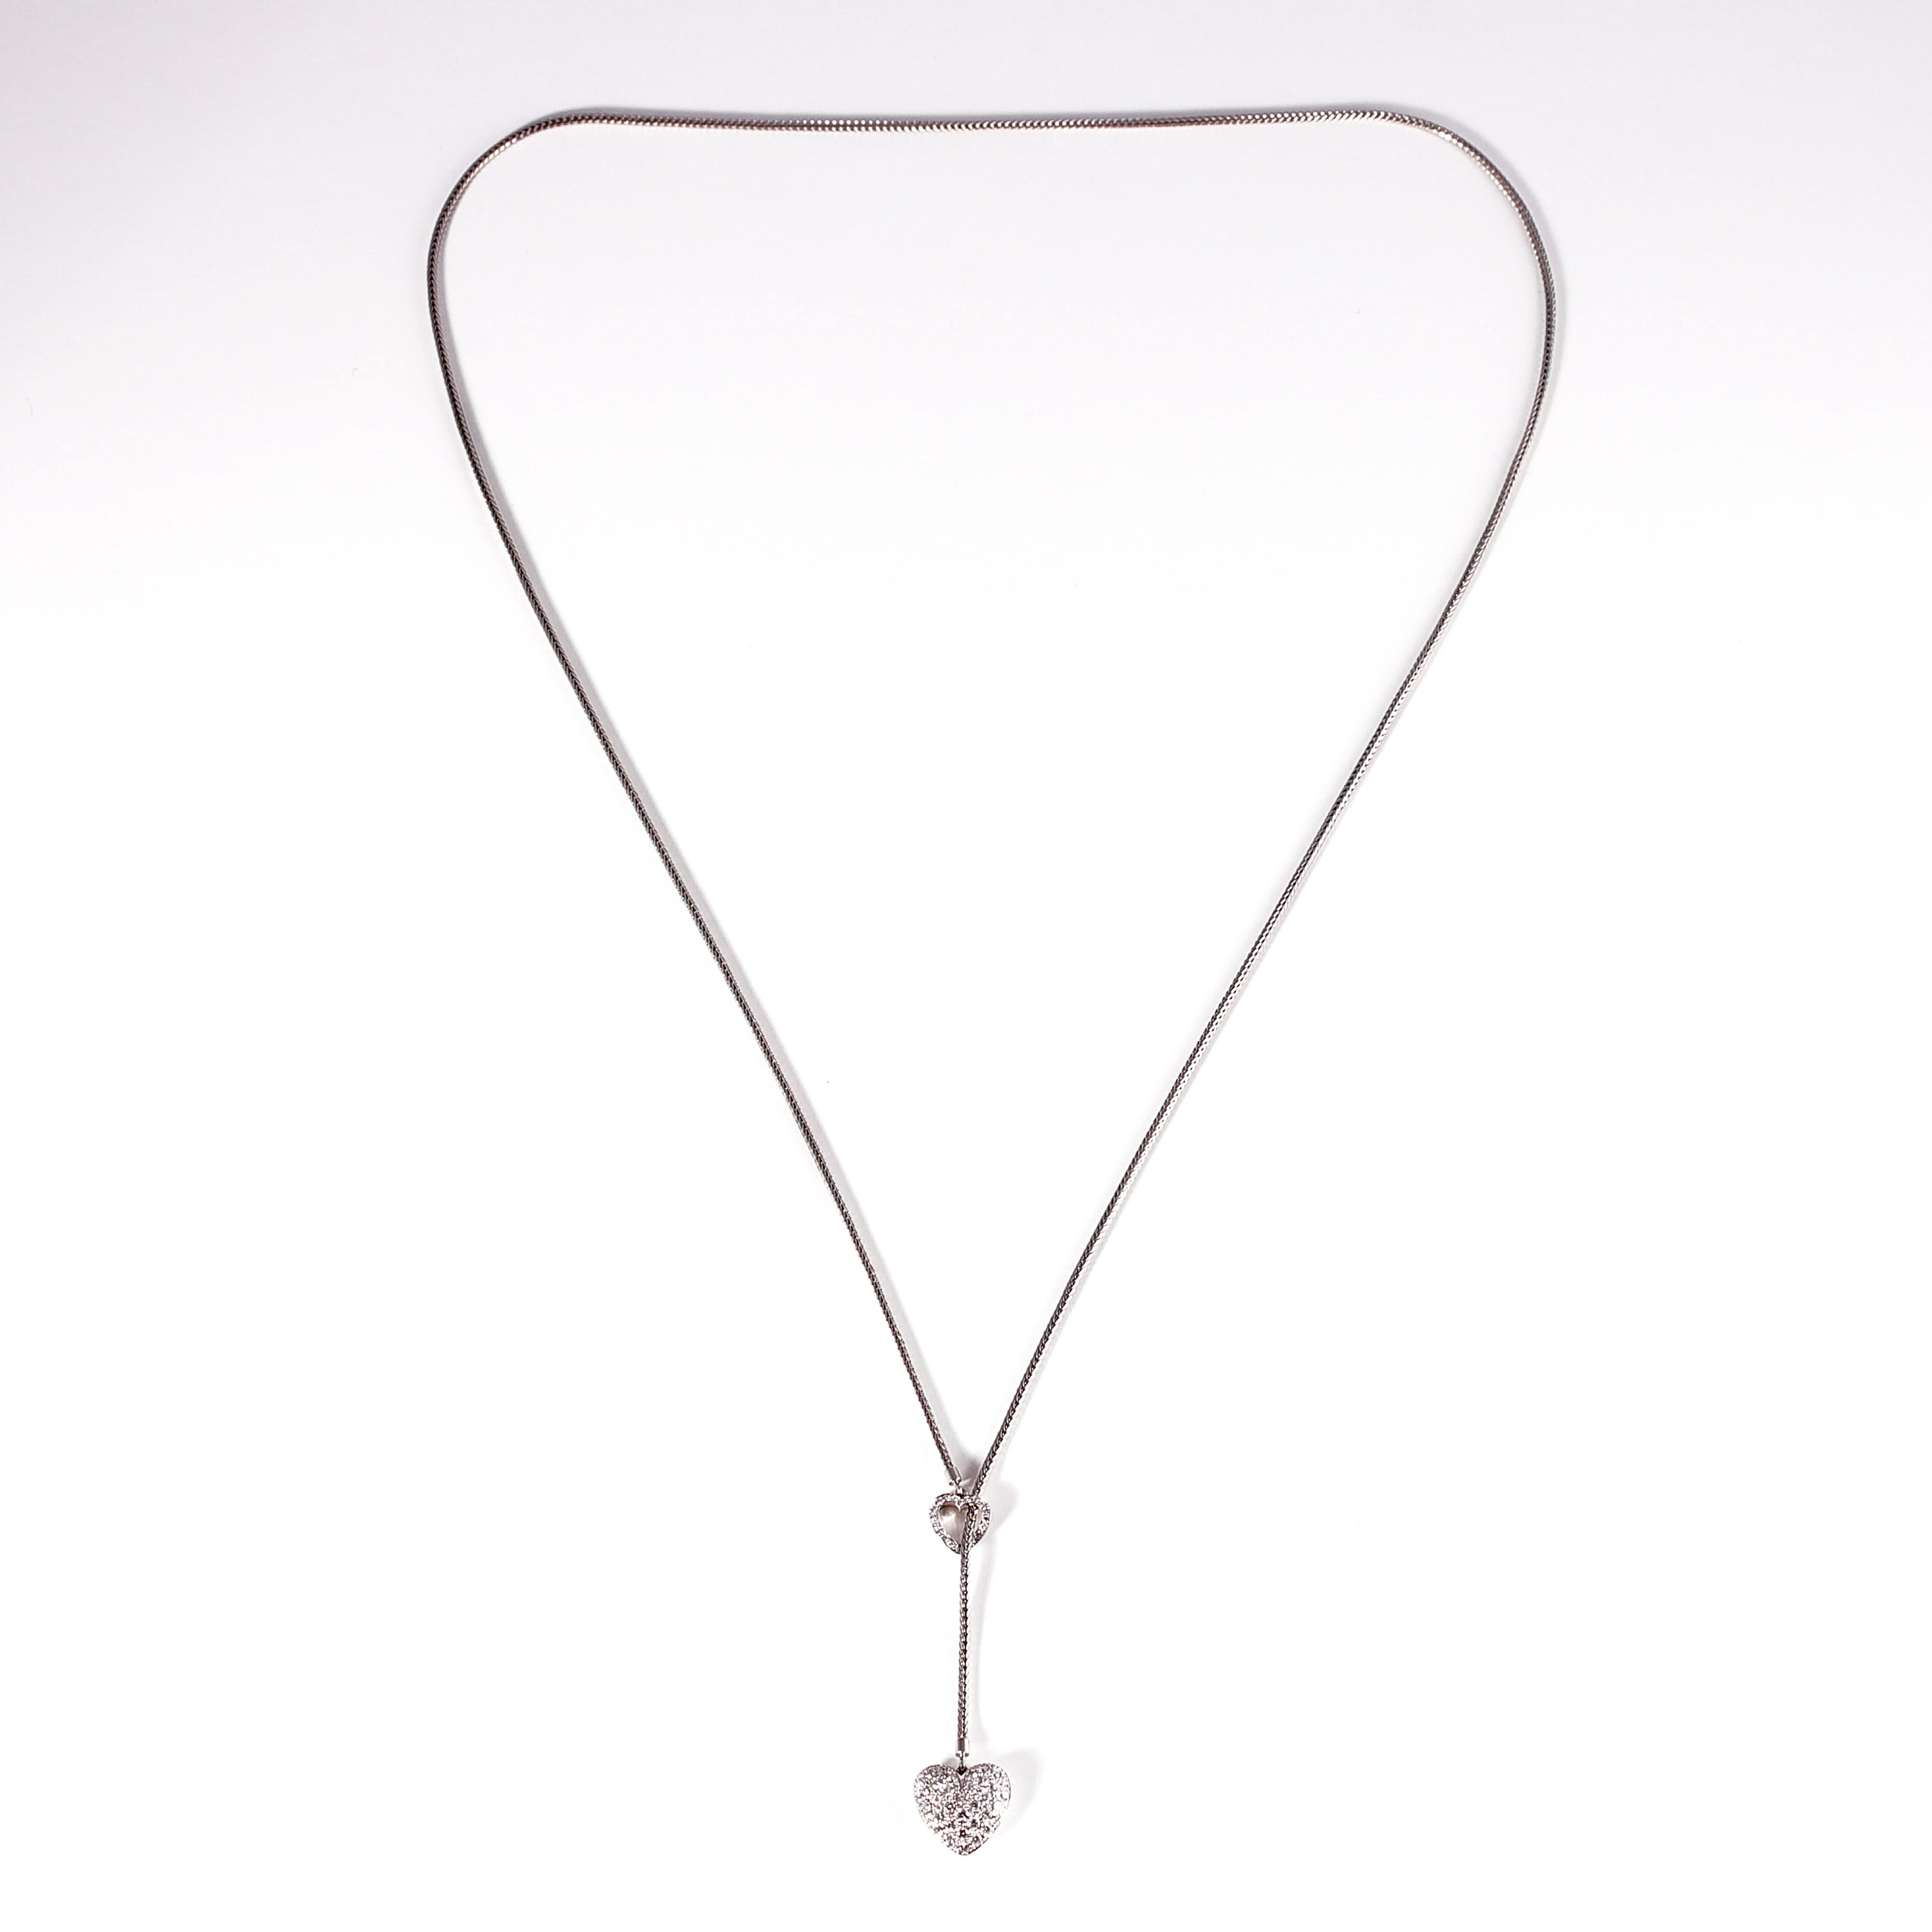 Tiffany & Co. 0.78 carat double diamond heart lariat necklace set in Platinum.  This necklace is 27 inches long and can can be adjusted to go with any ensemble!  It is stamped 